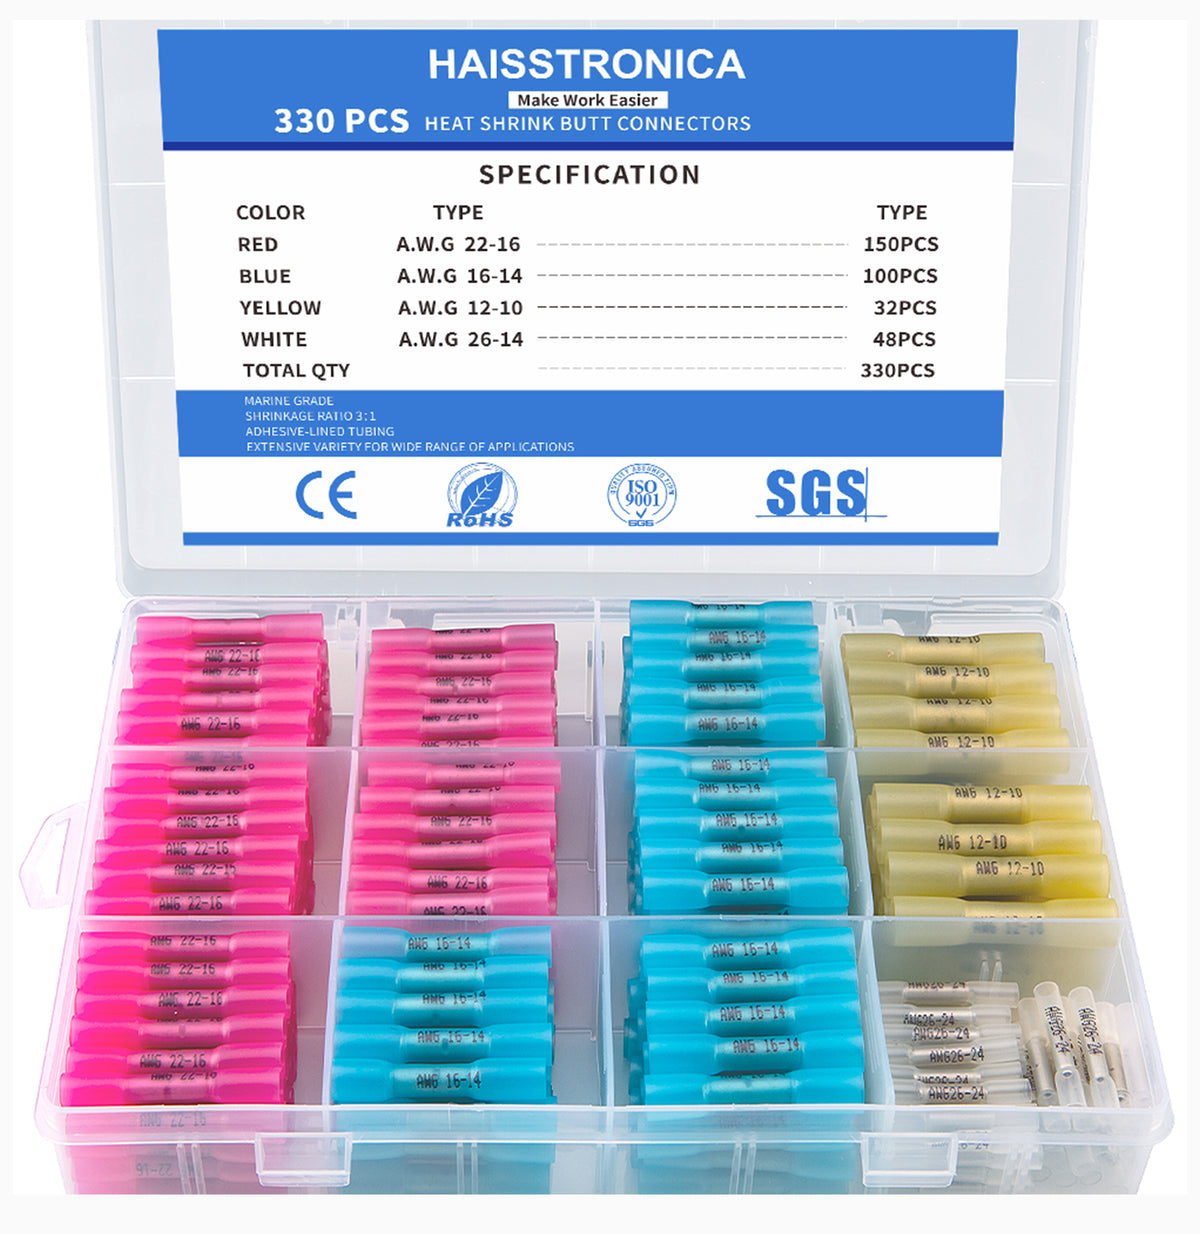 330PCS Marine Grade Heat Shrink Butt Connectors | Waterproof Wire Connectors | Tinned Red Copper